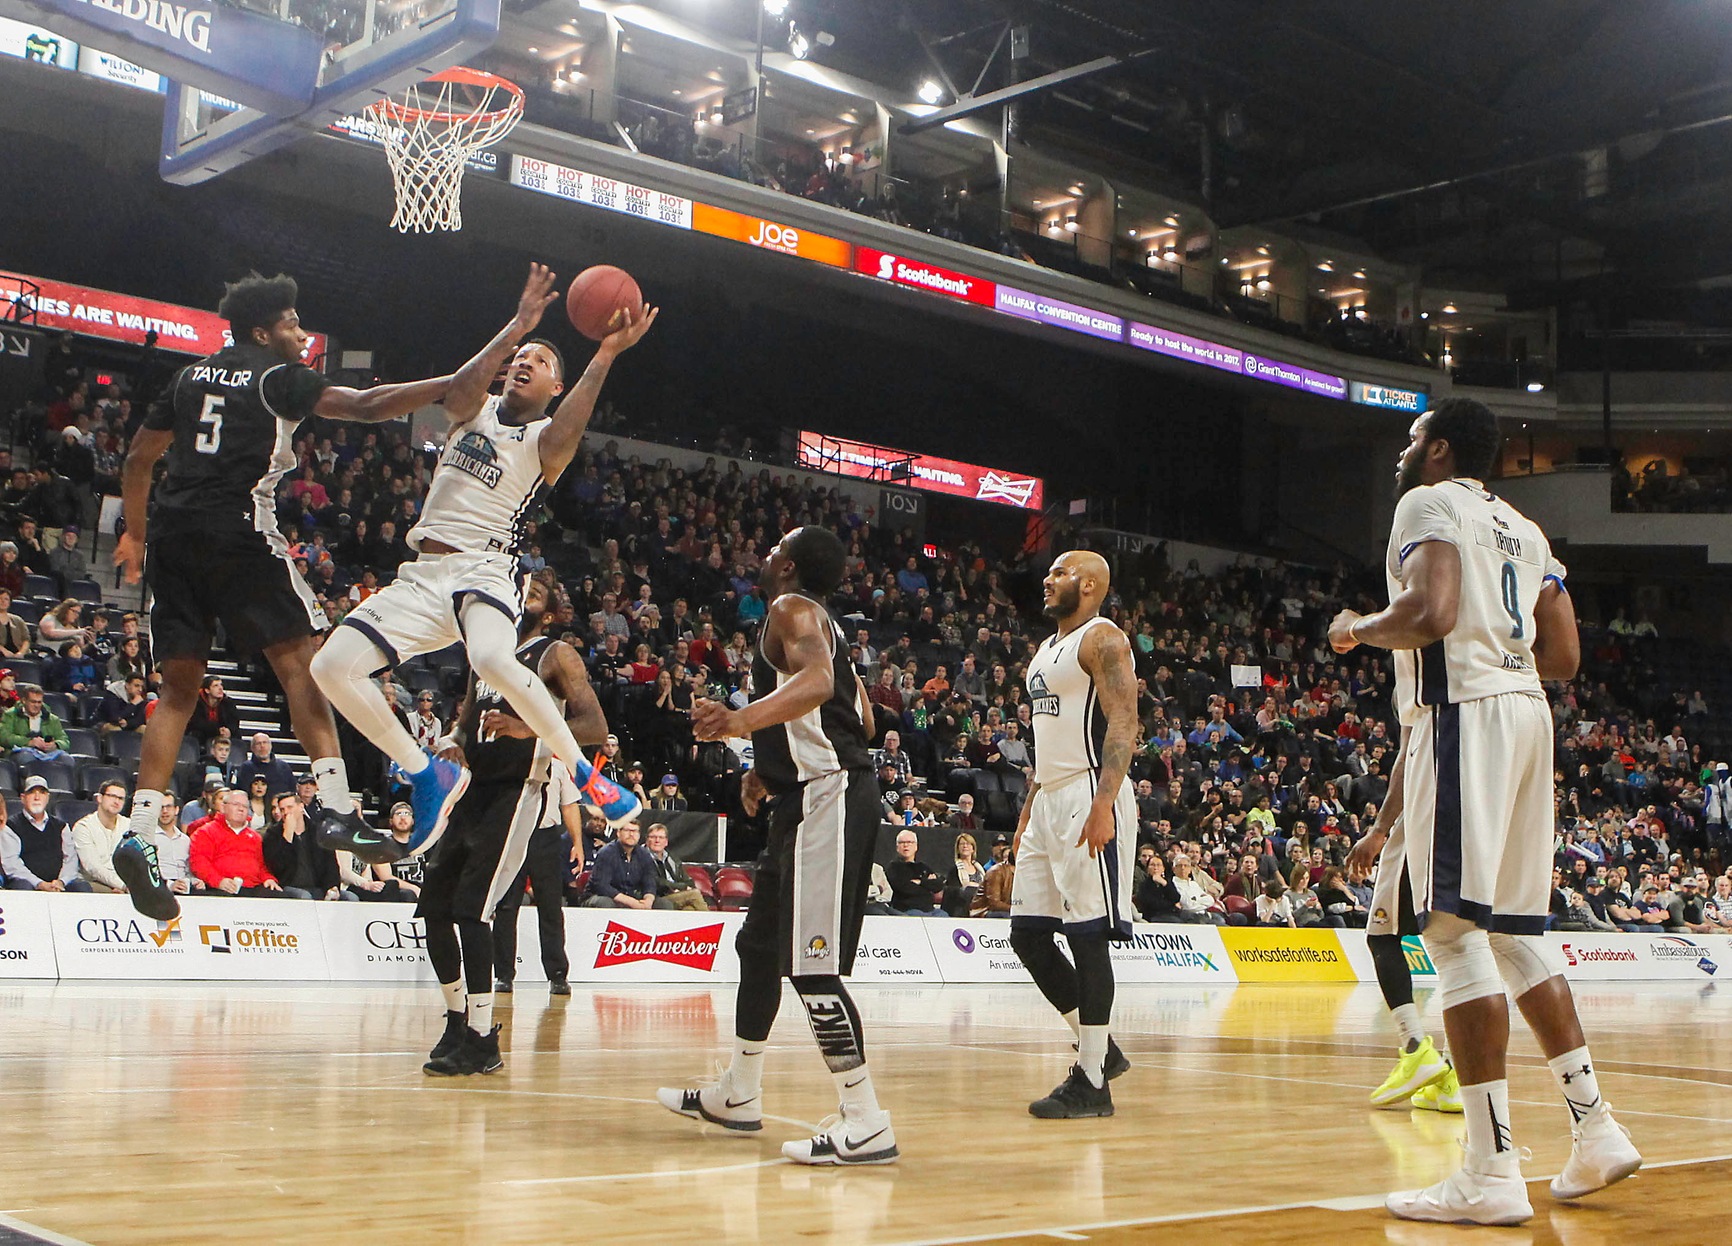 Hurricanes Prevail at Scotiabank Over Magic